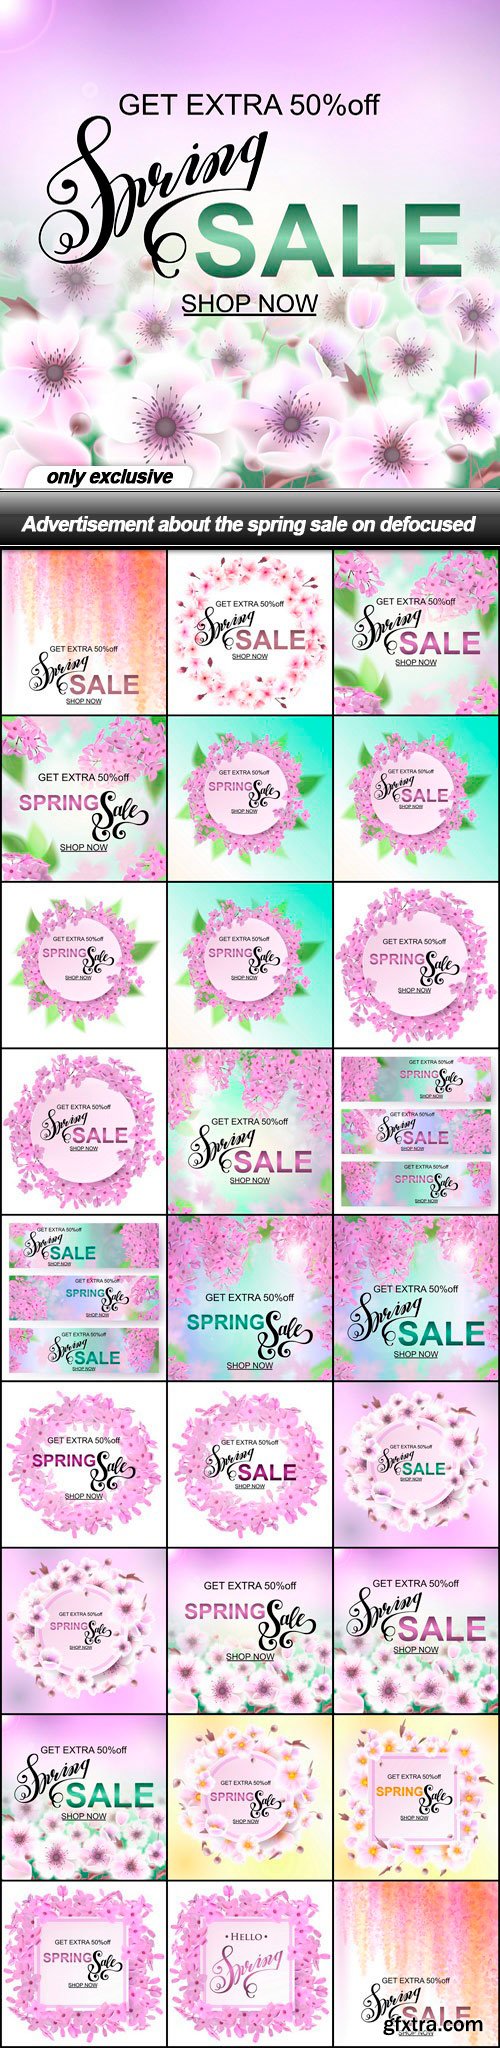 Advertisement about the spring sale on defocused - 26 EPS